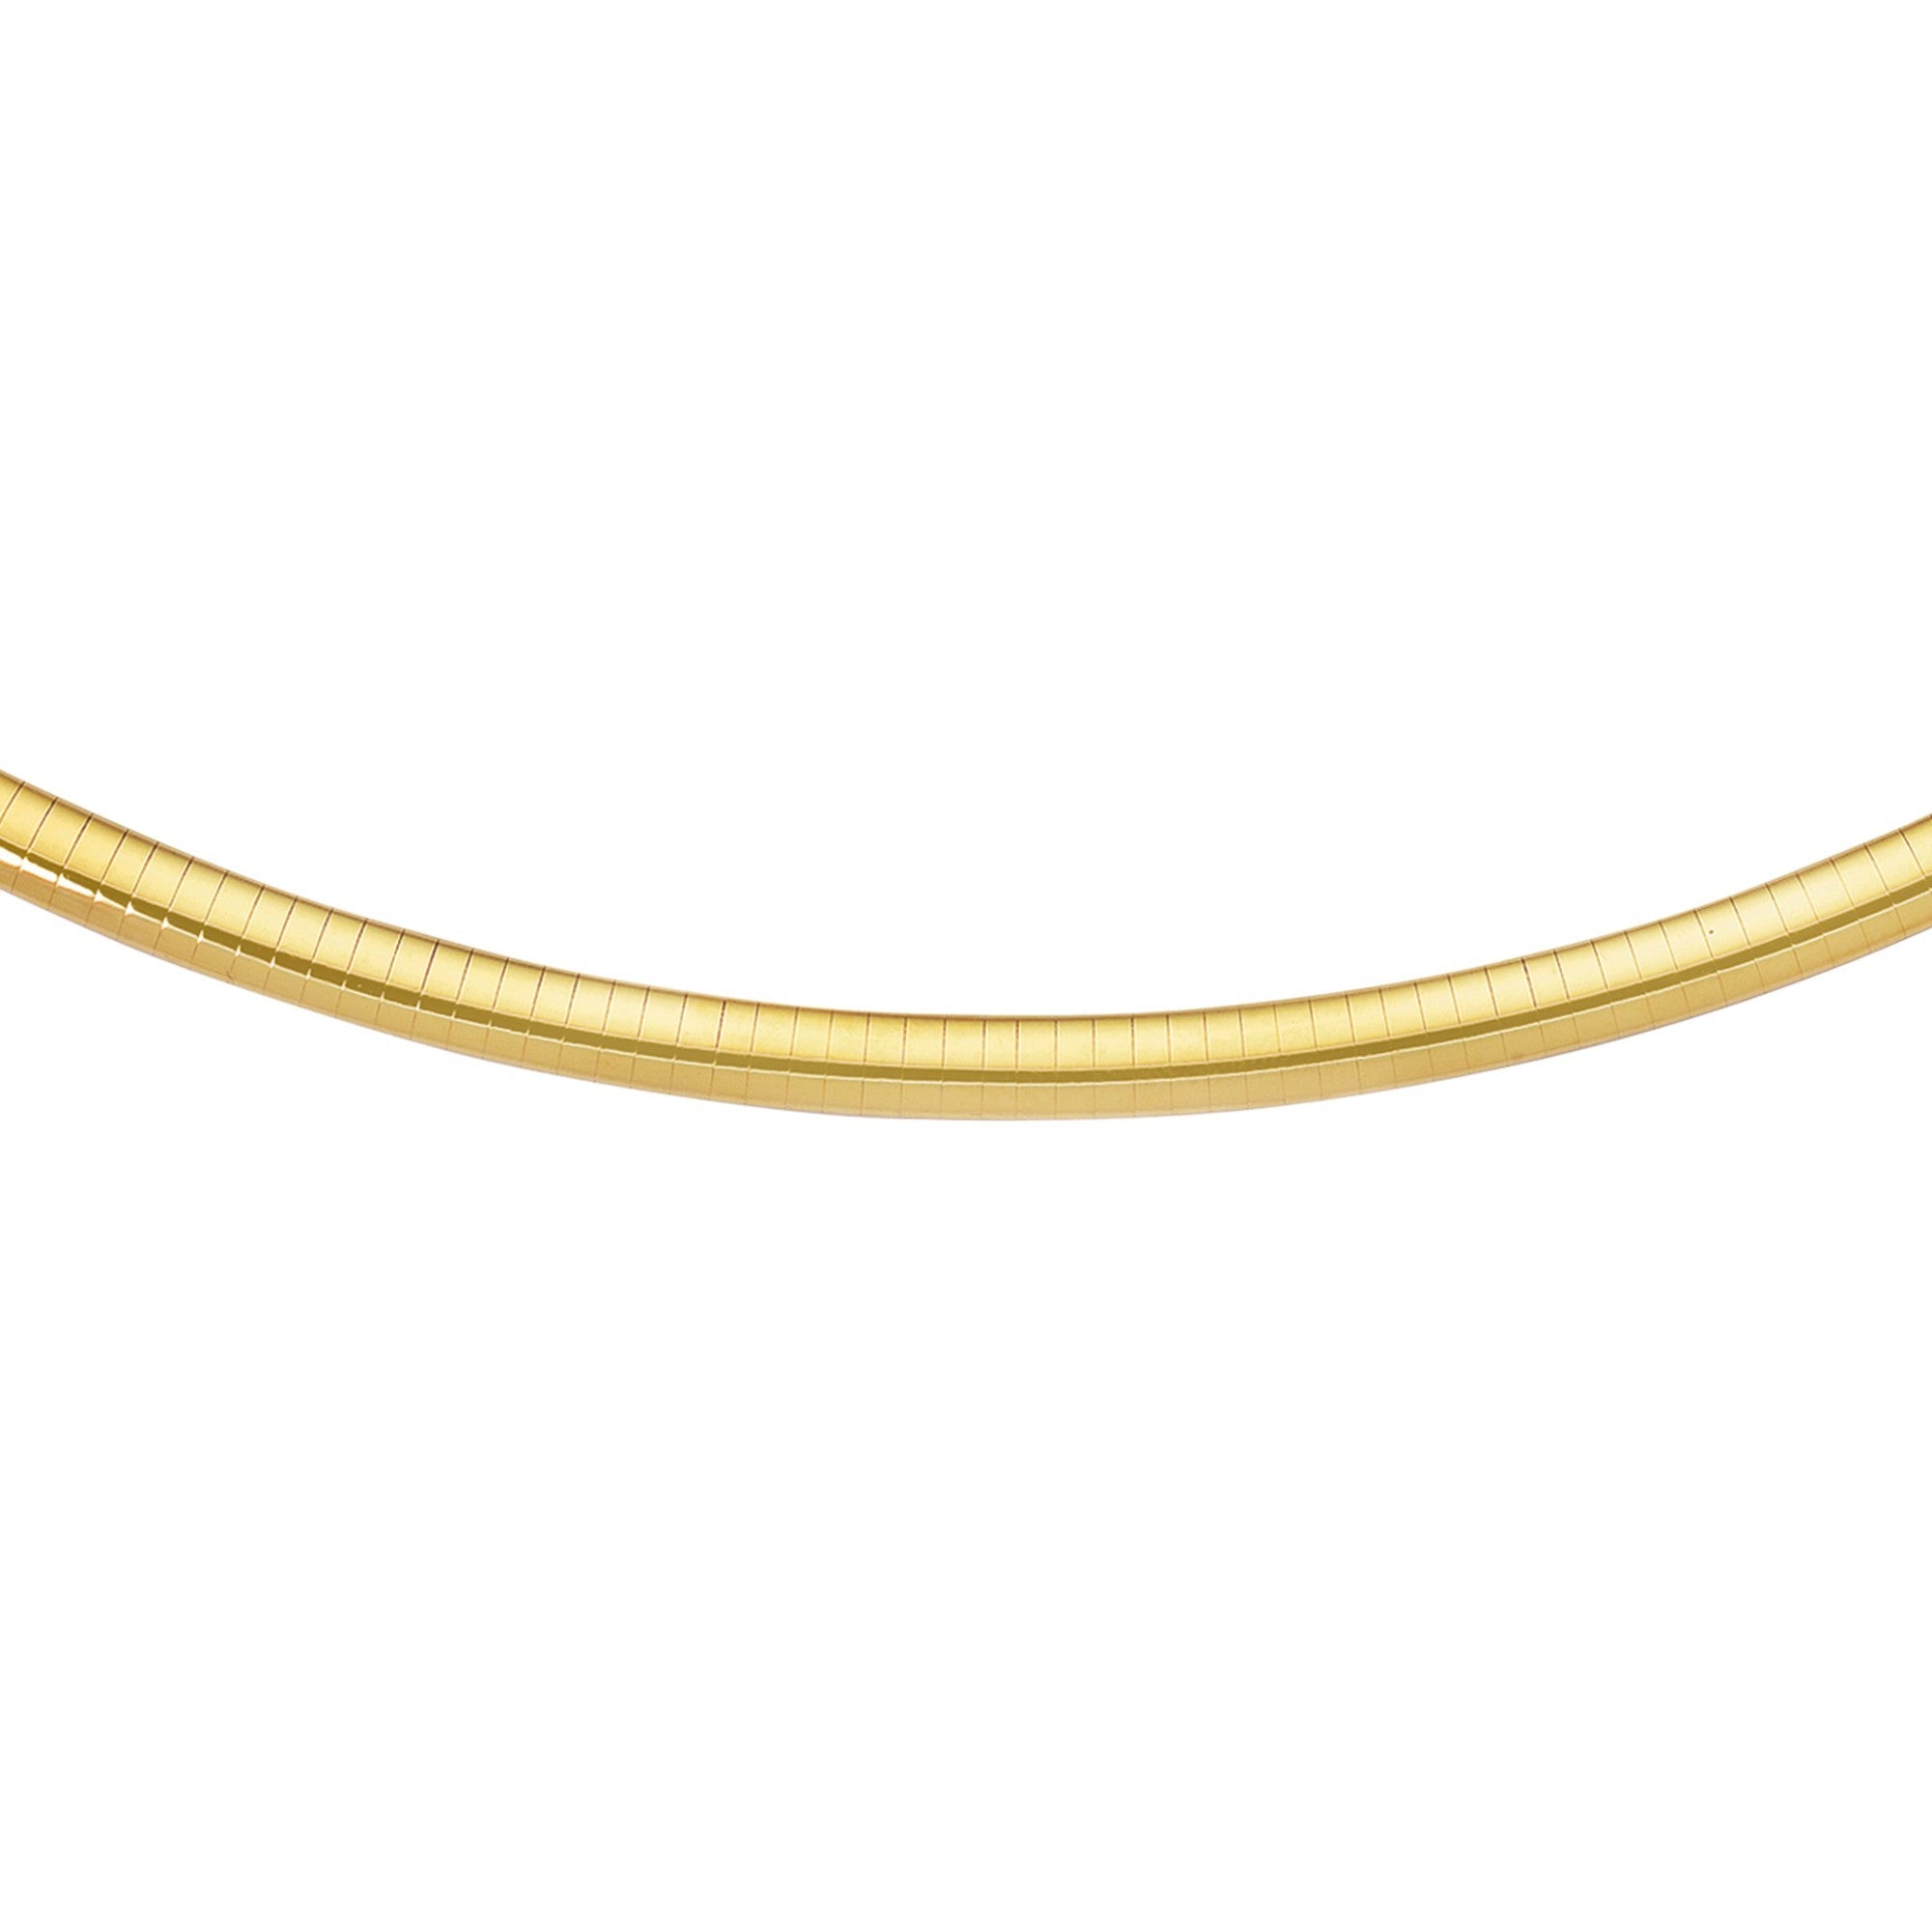 14K SOLID YELLOW GOLD OMEGA NECKLACE